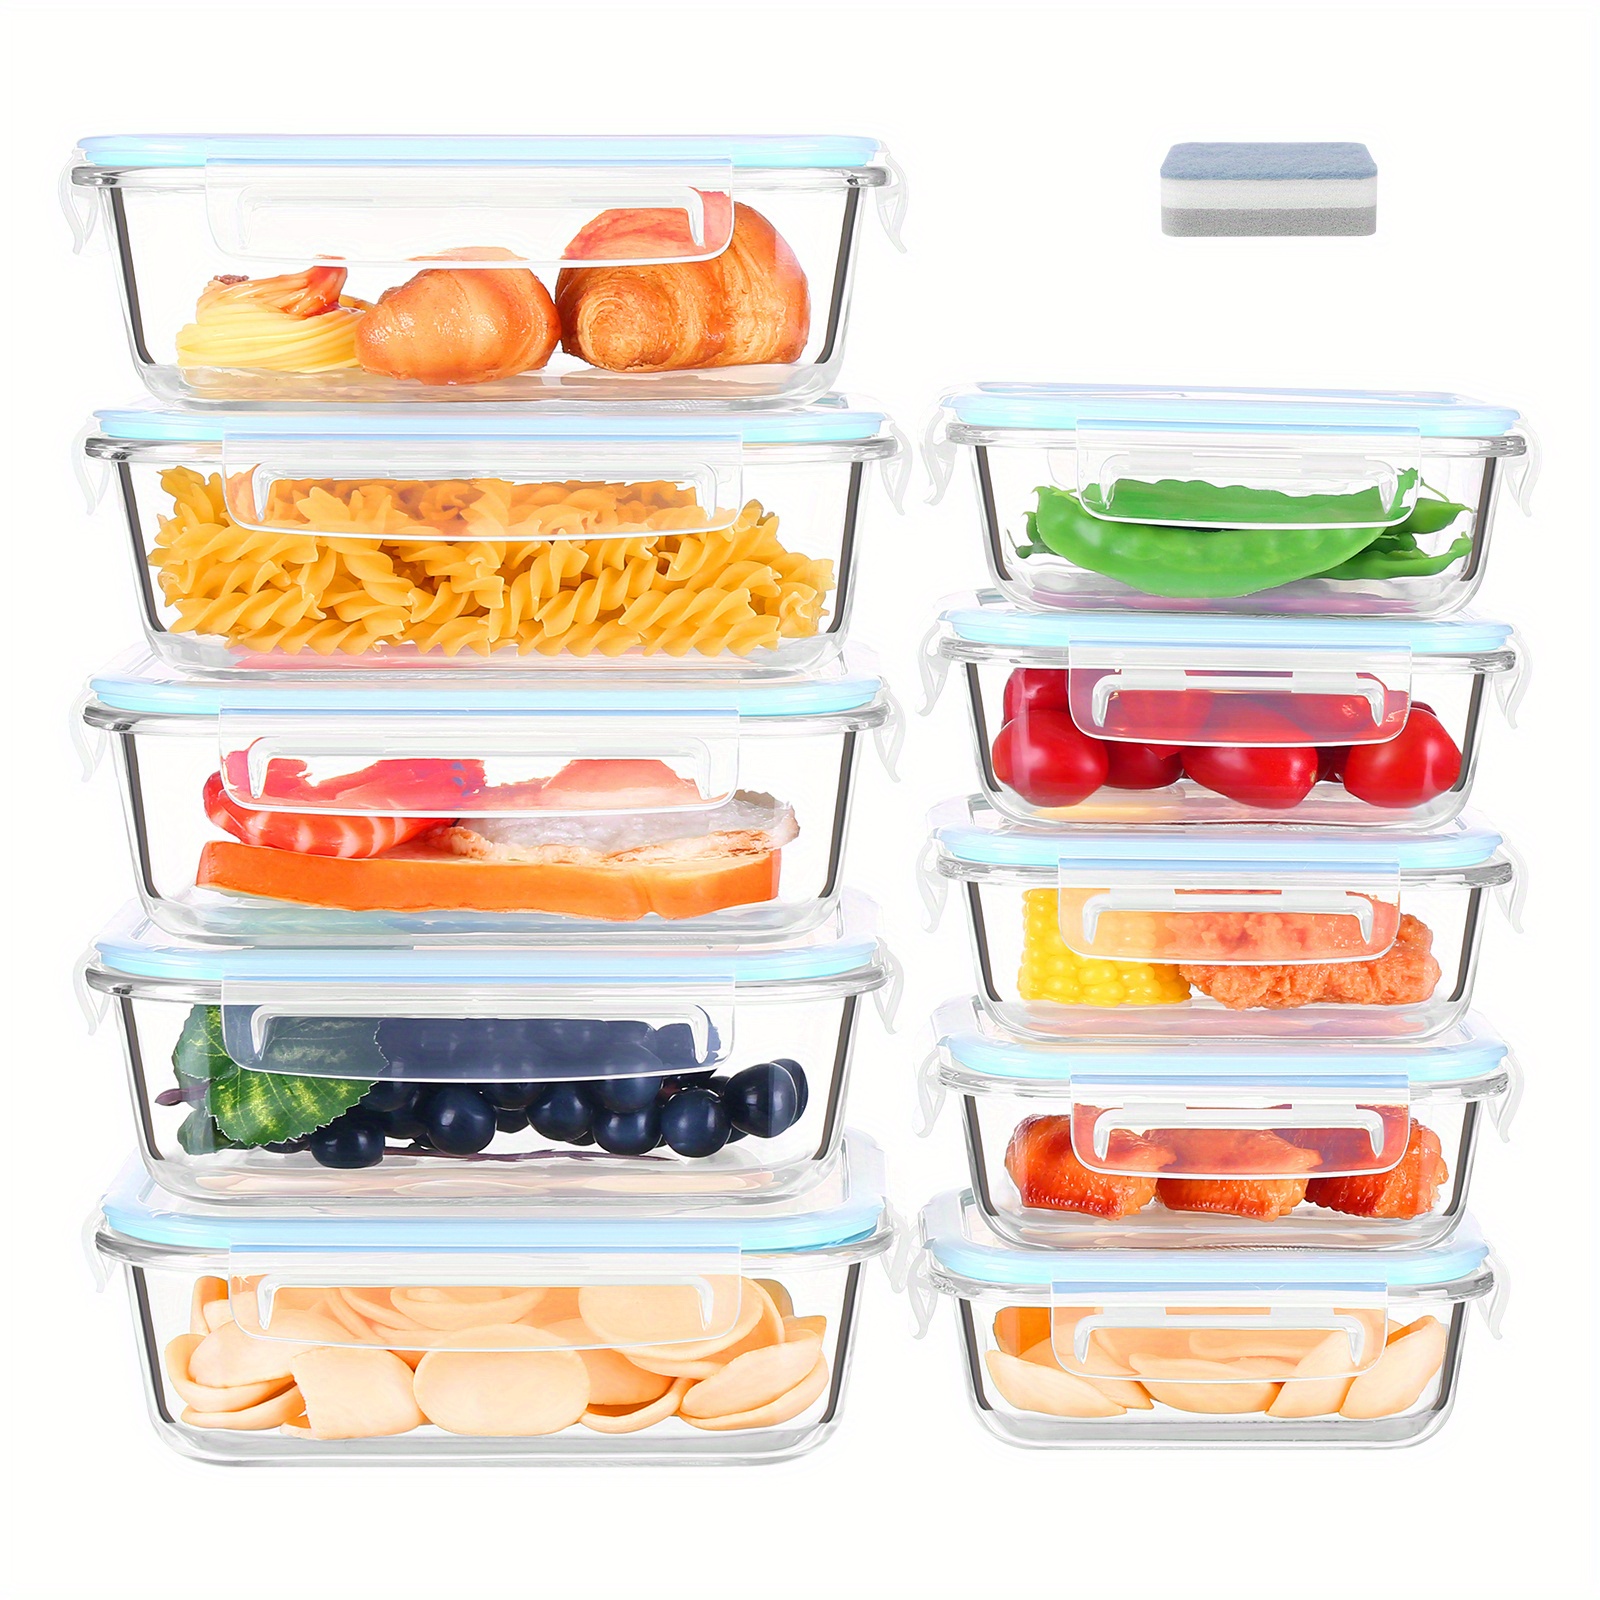 

Airtight Glass Food Storage Containers With Snap Lids - Bpa-free, Microwave & Dishwasher Safe For Meal Prep And Kitchen Organization